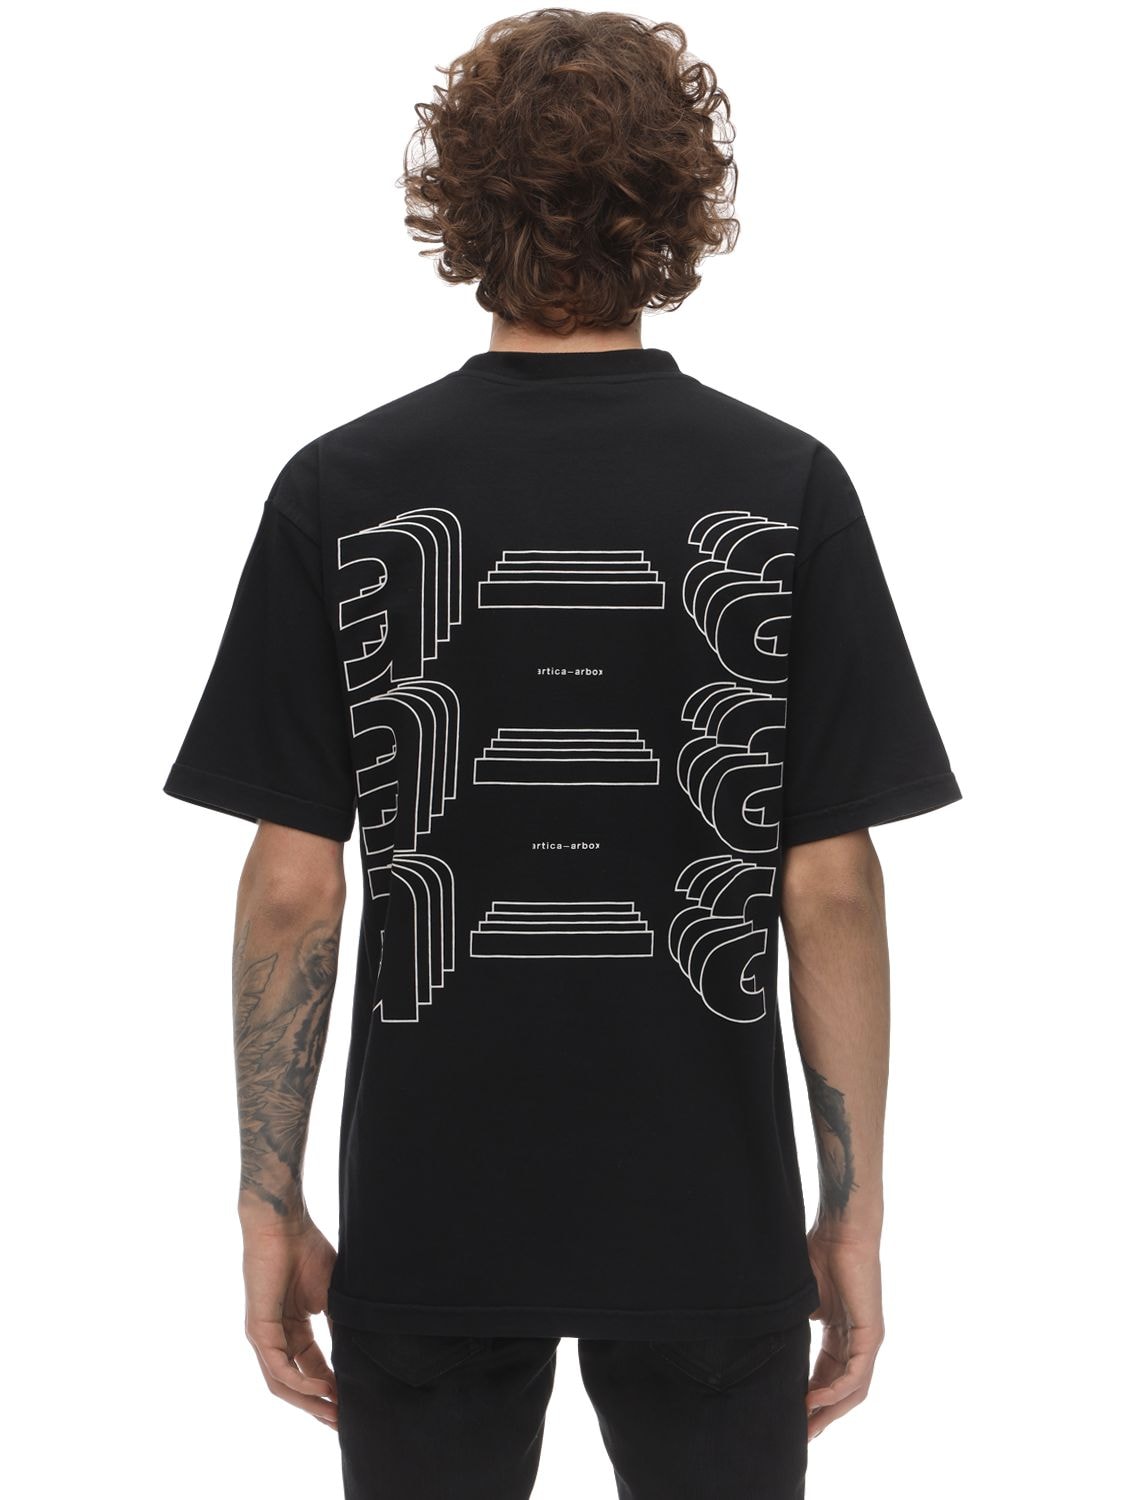 A-a   Artica-arbox Printed Cotton Jersey T-shirt In Black